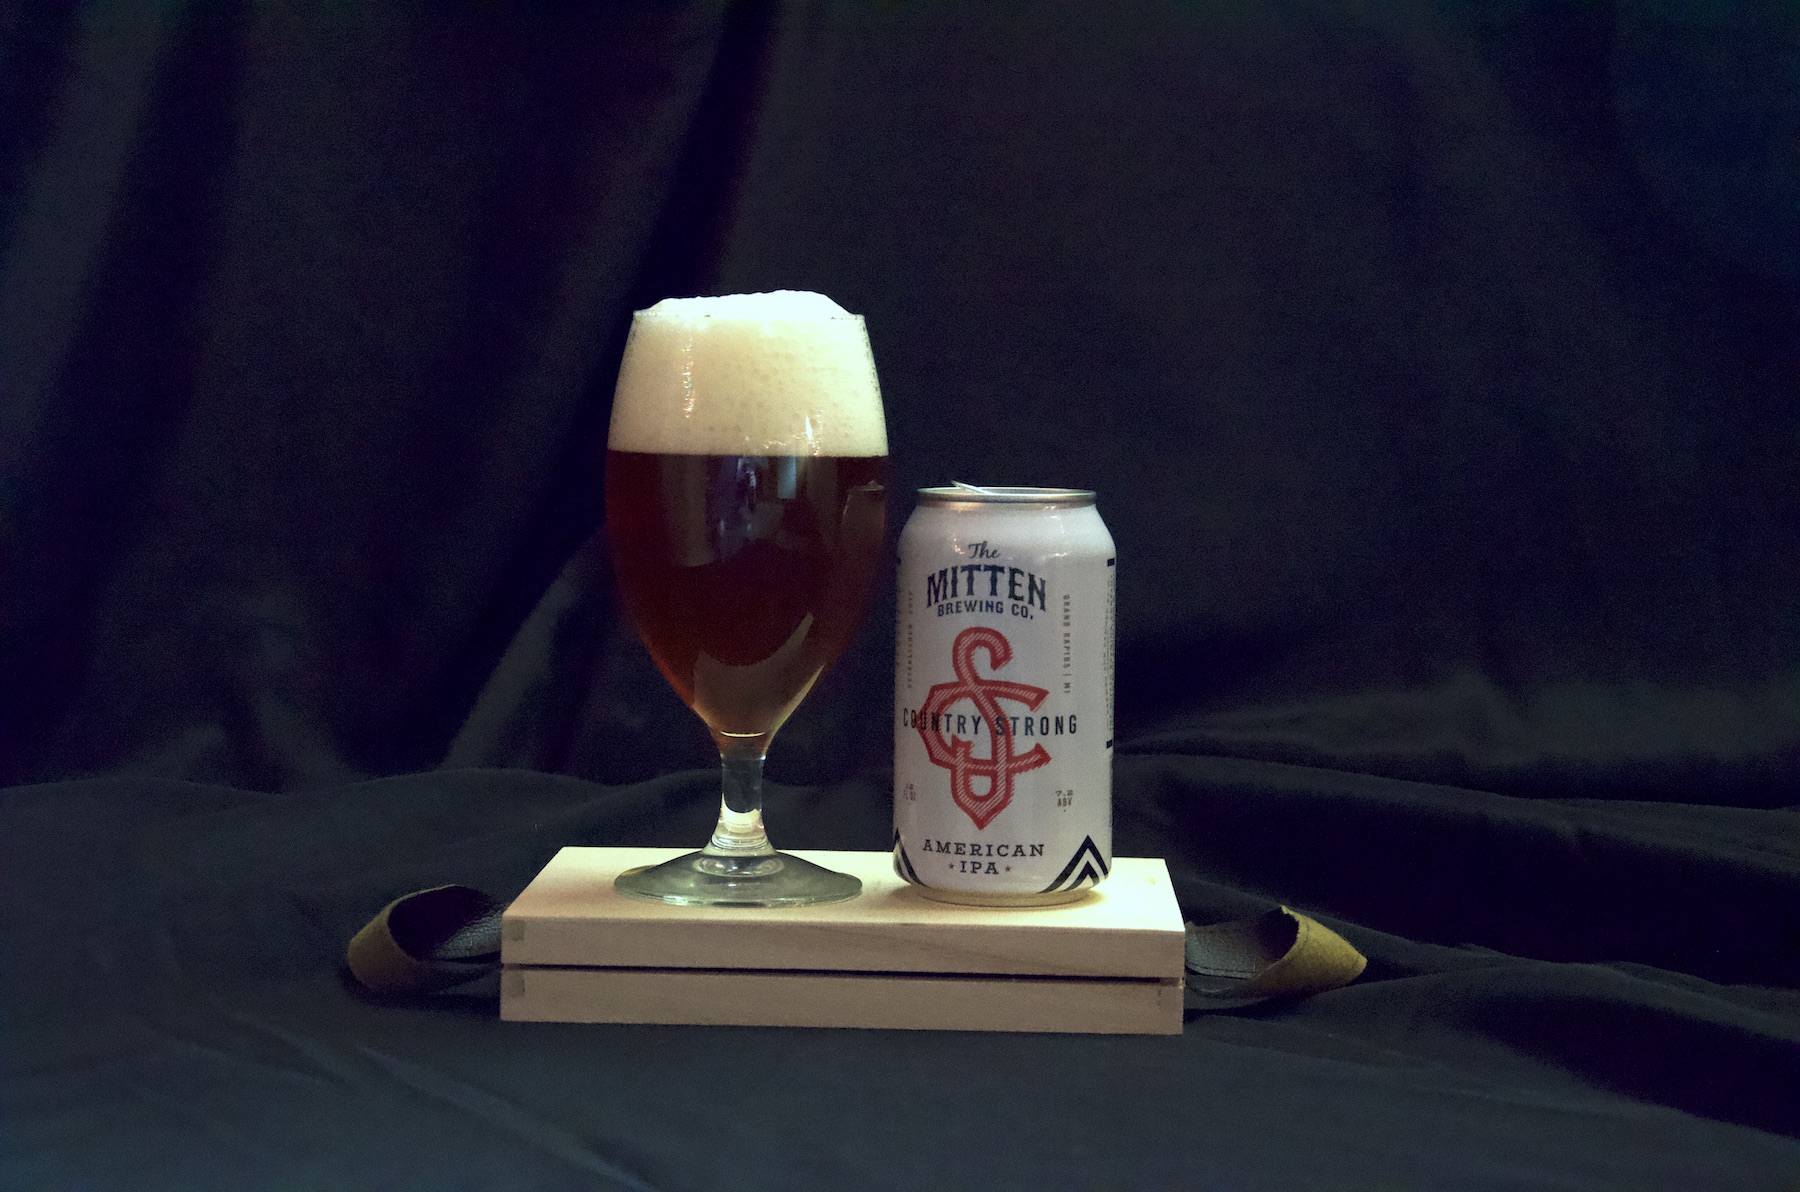 The Mitten Brewing Company | Country Strong American IPA